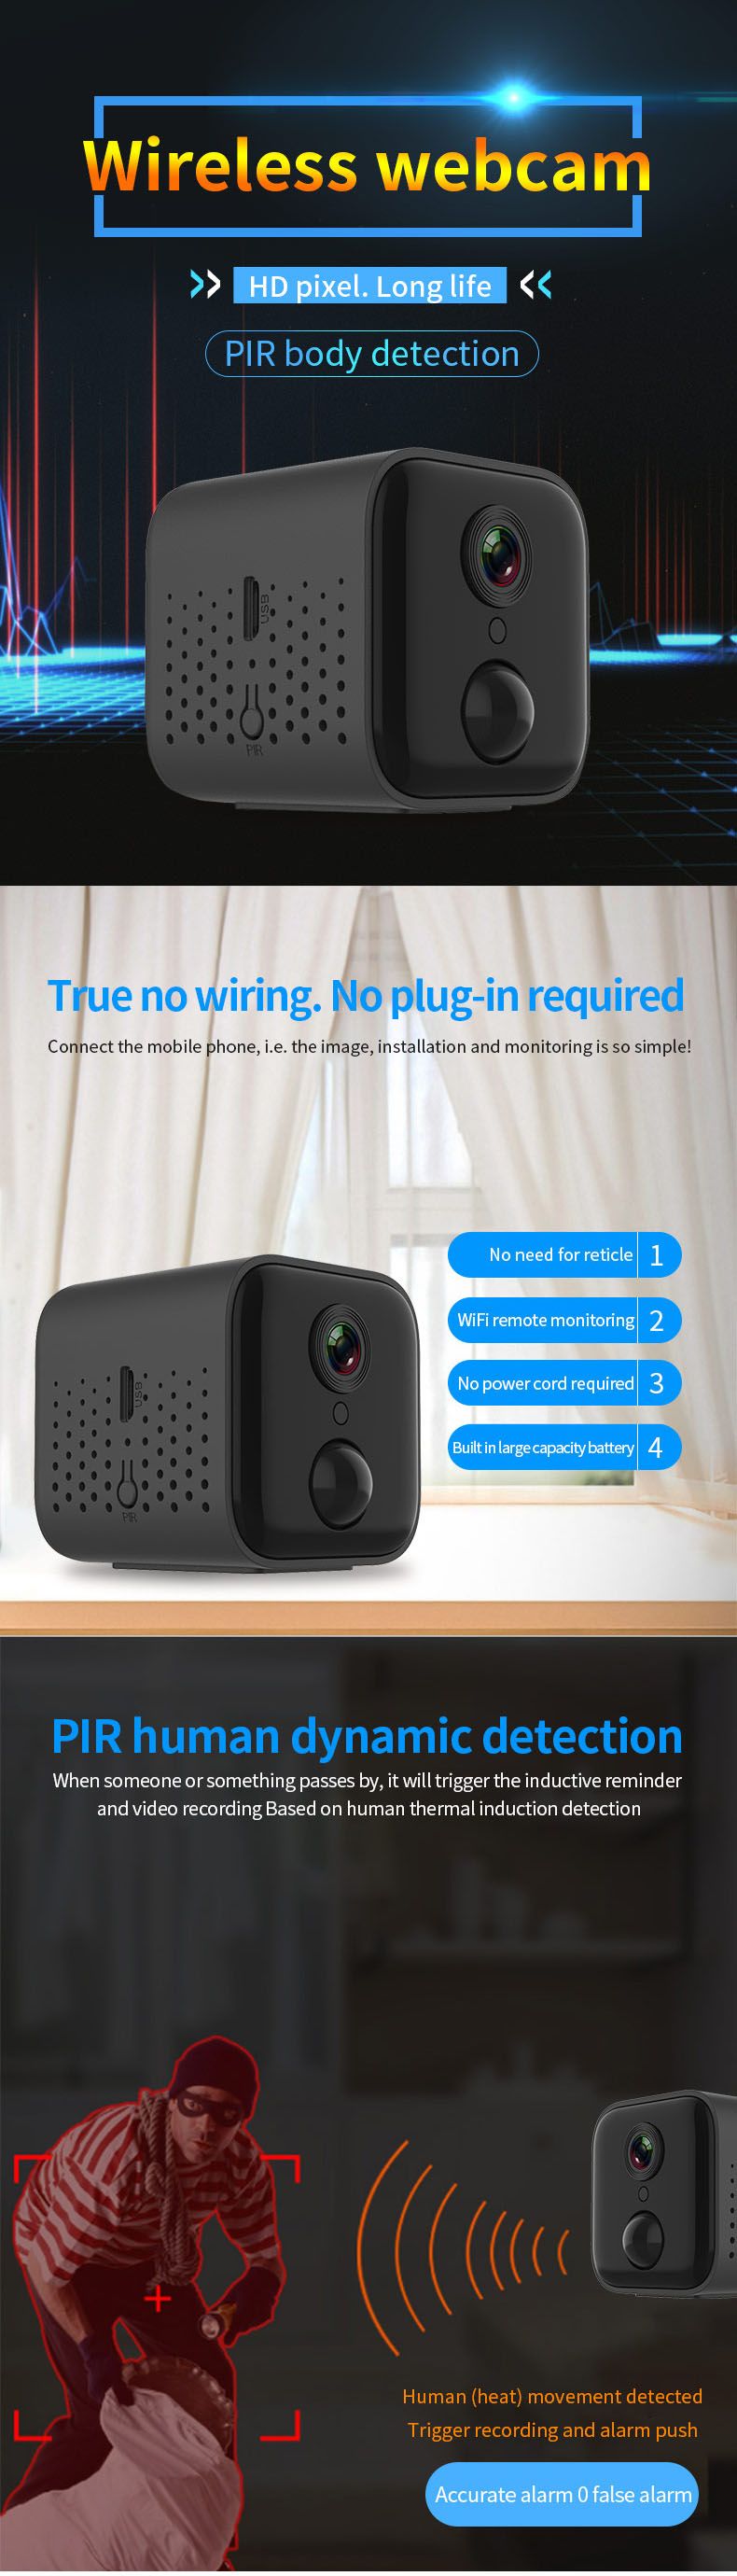 A21-PIR-Induction-WIFI-Camera-Built-in-Microphone-H264-IP-Camera-200M-HD-1080P-Lens-29quot-CMOS-Nigh-1679740